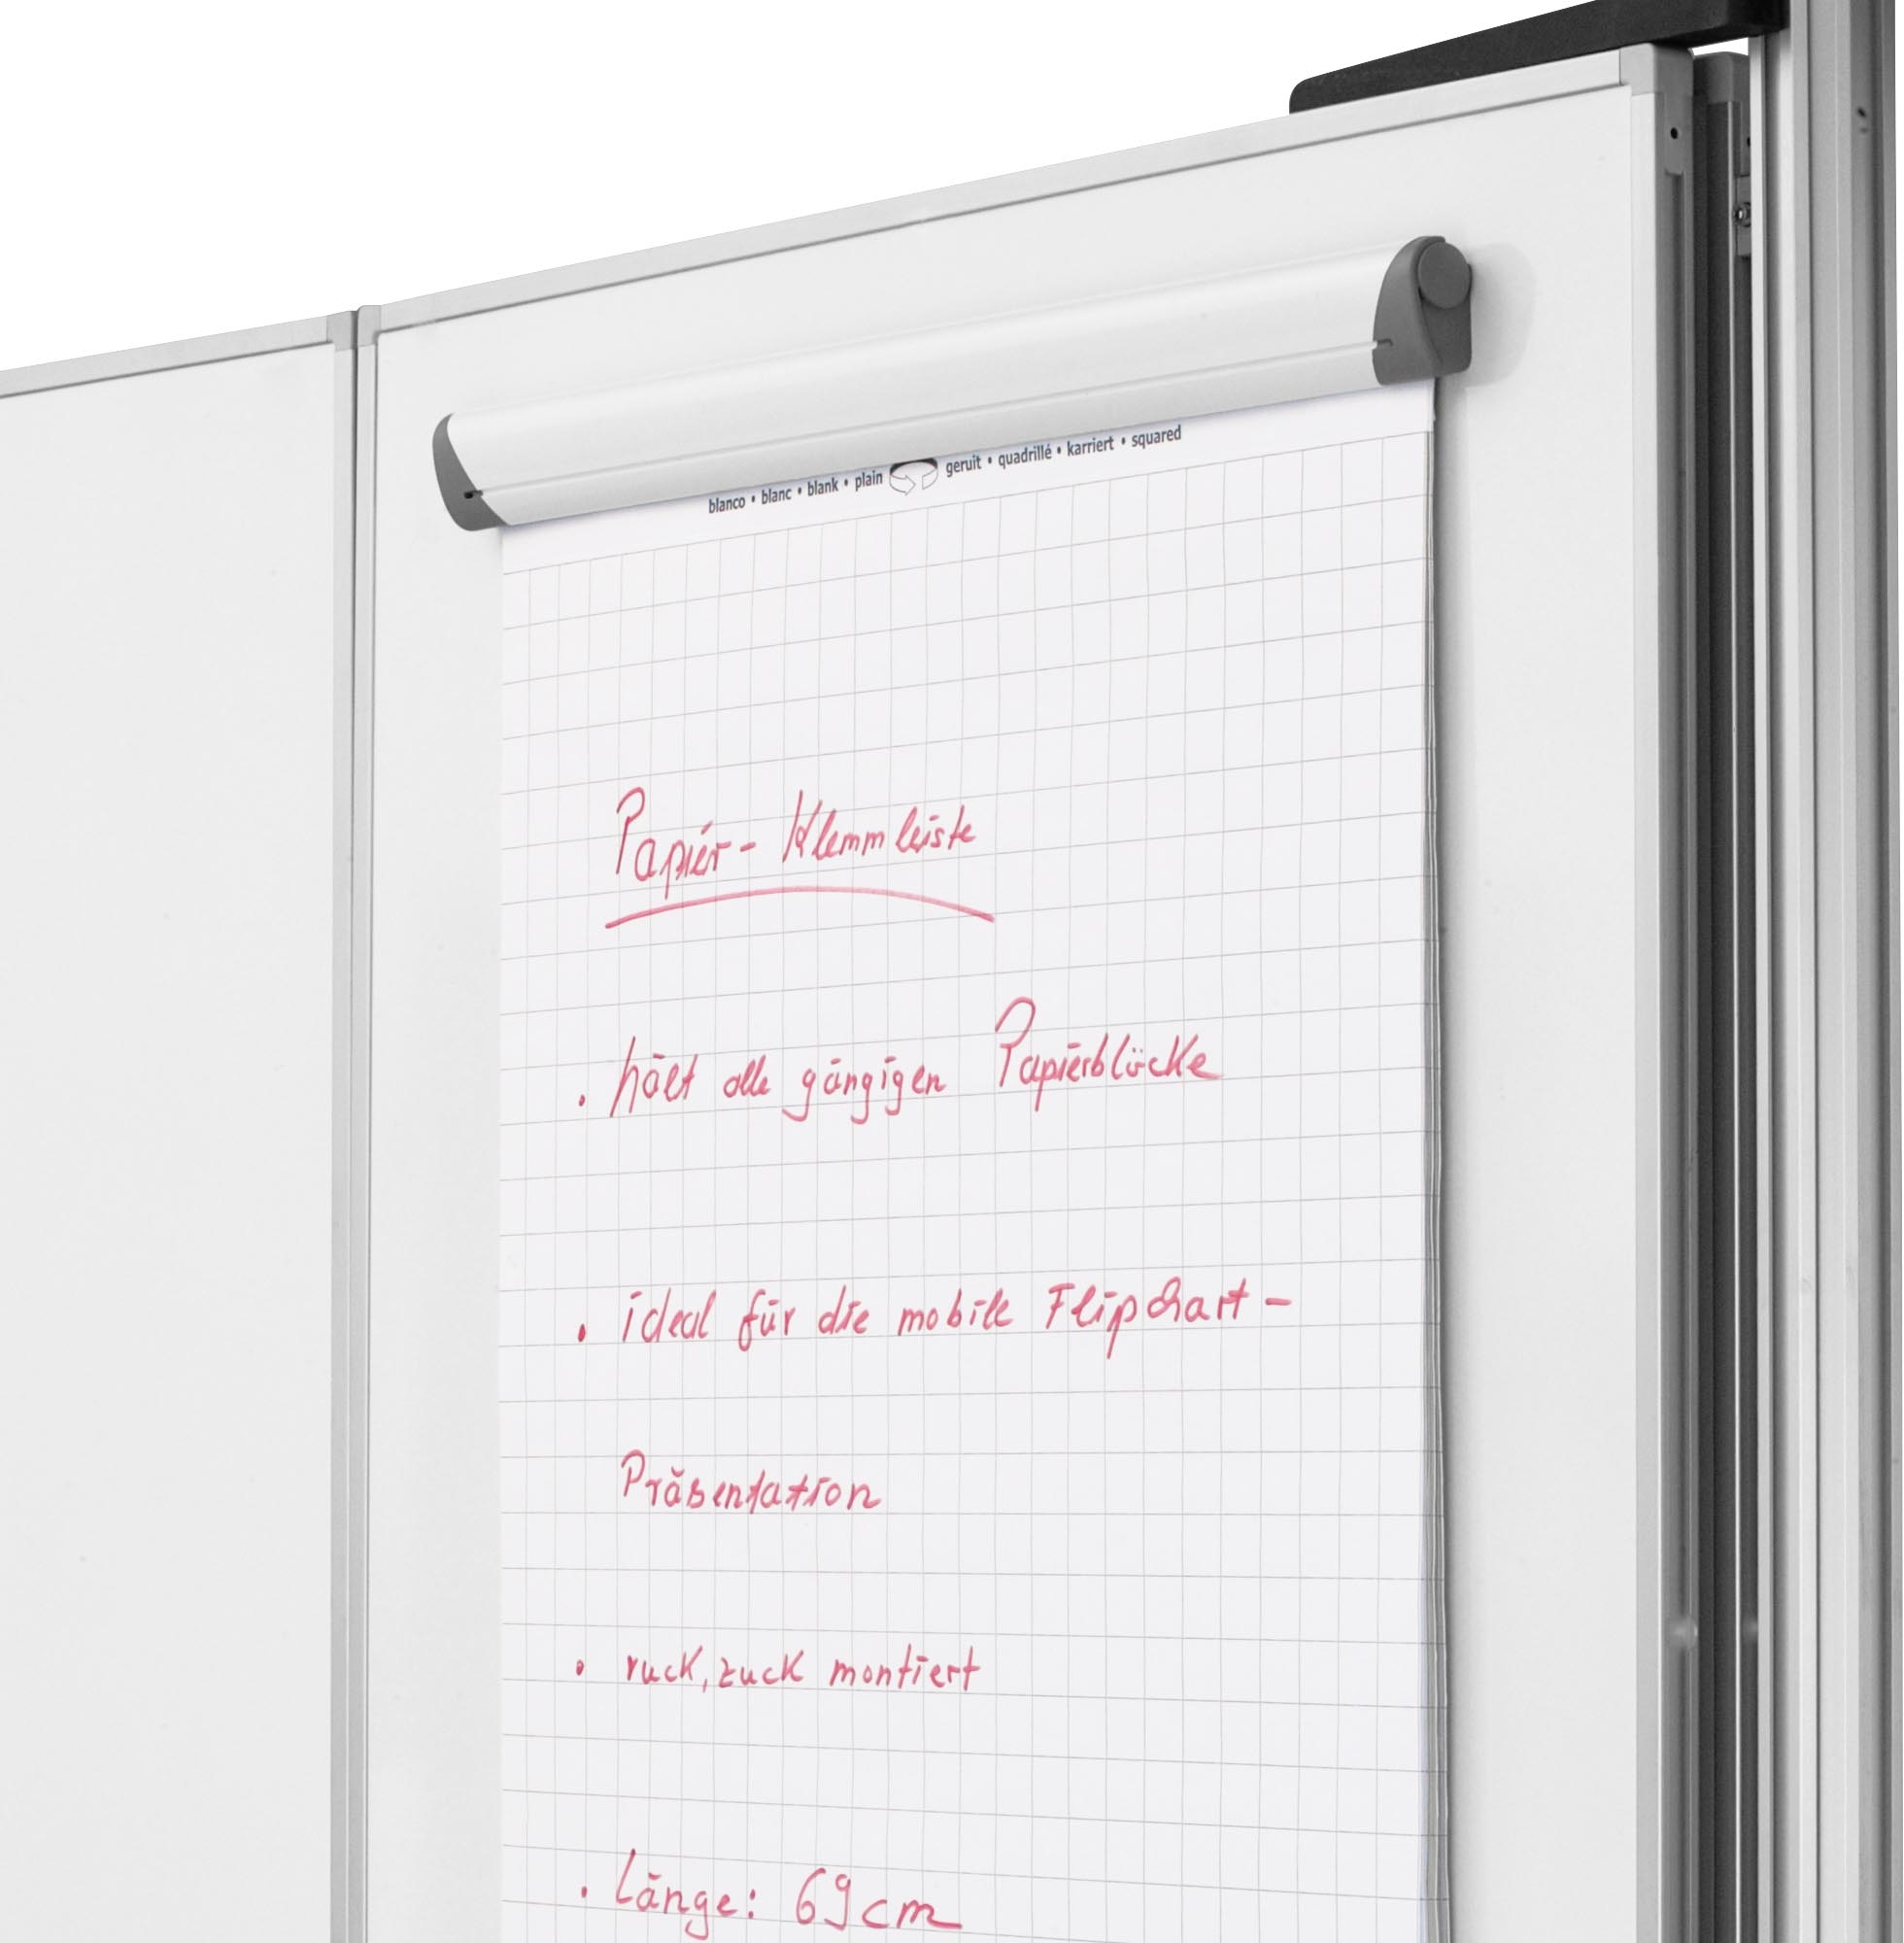 MAGNETOPLAN Magnétic flipchart 1246028 pour Whiteboards